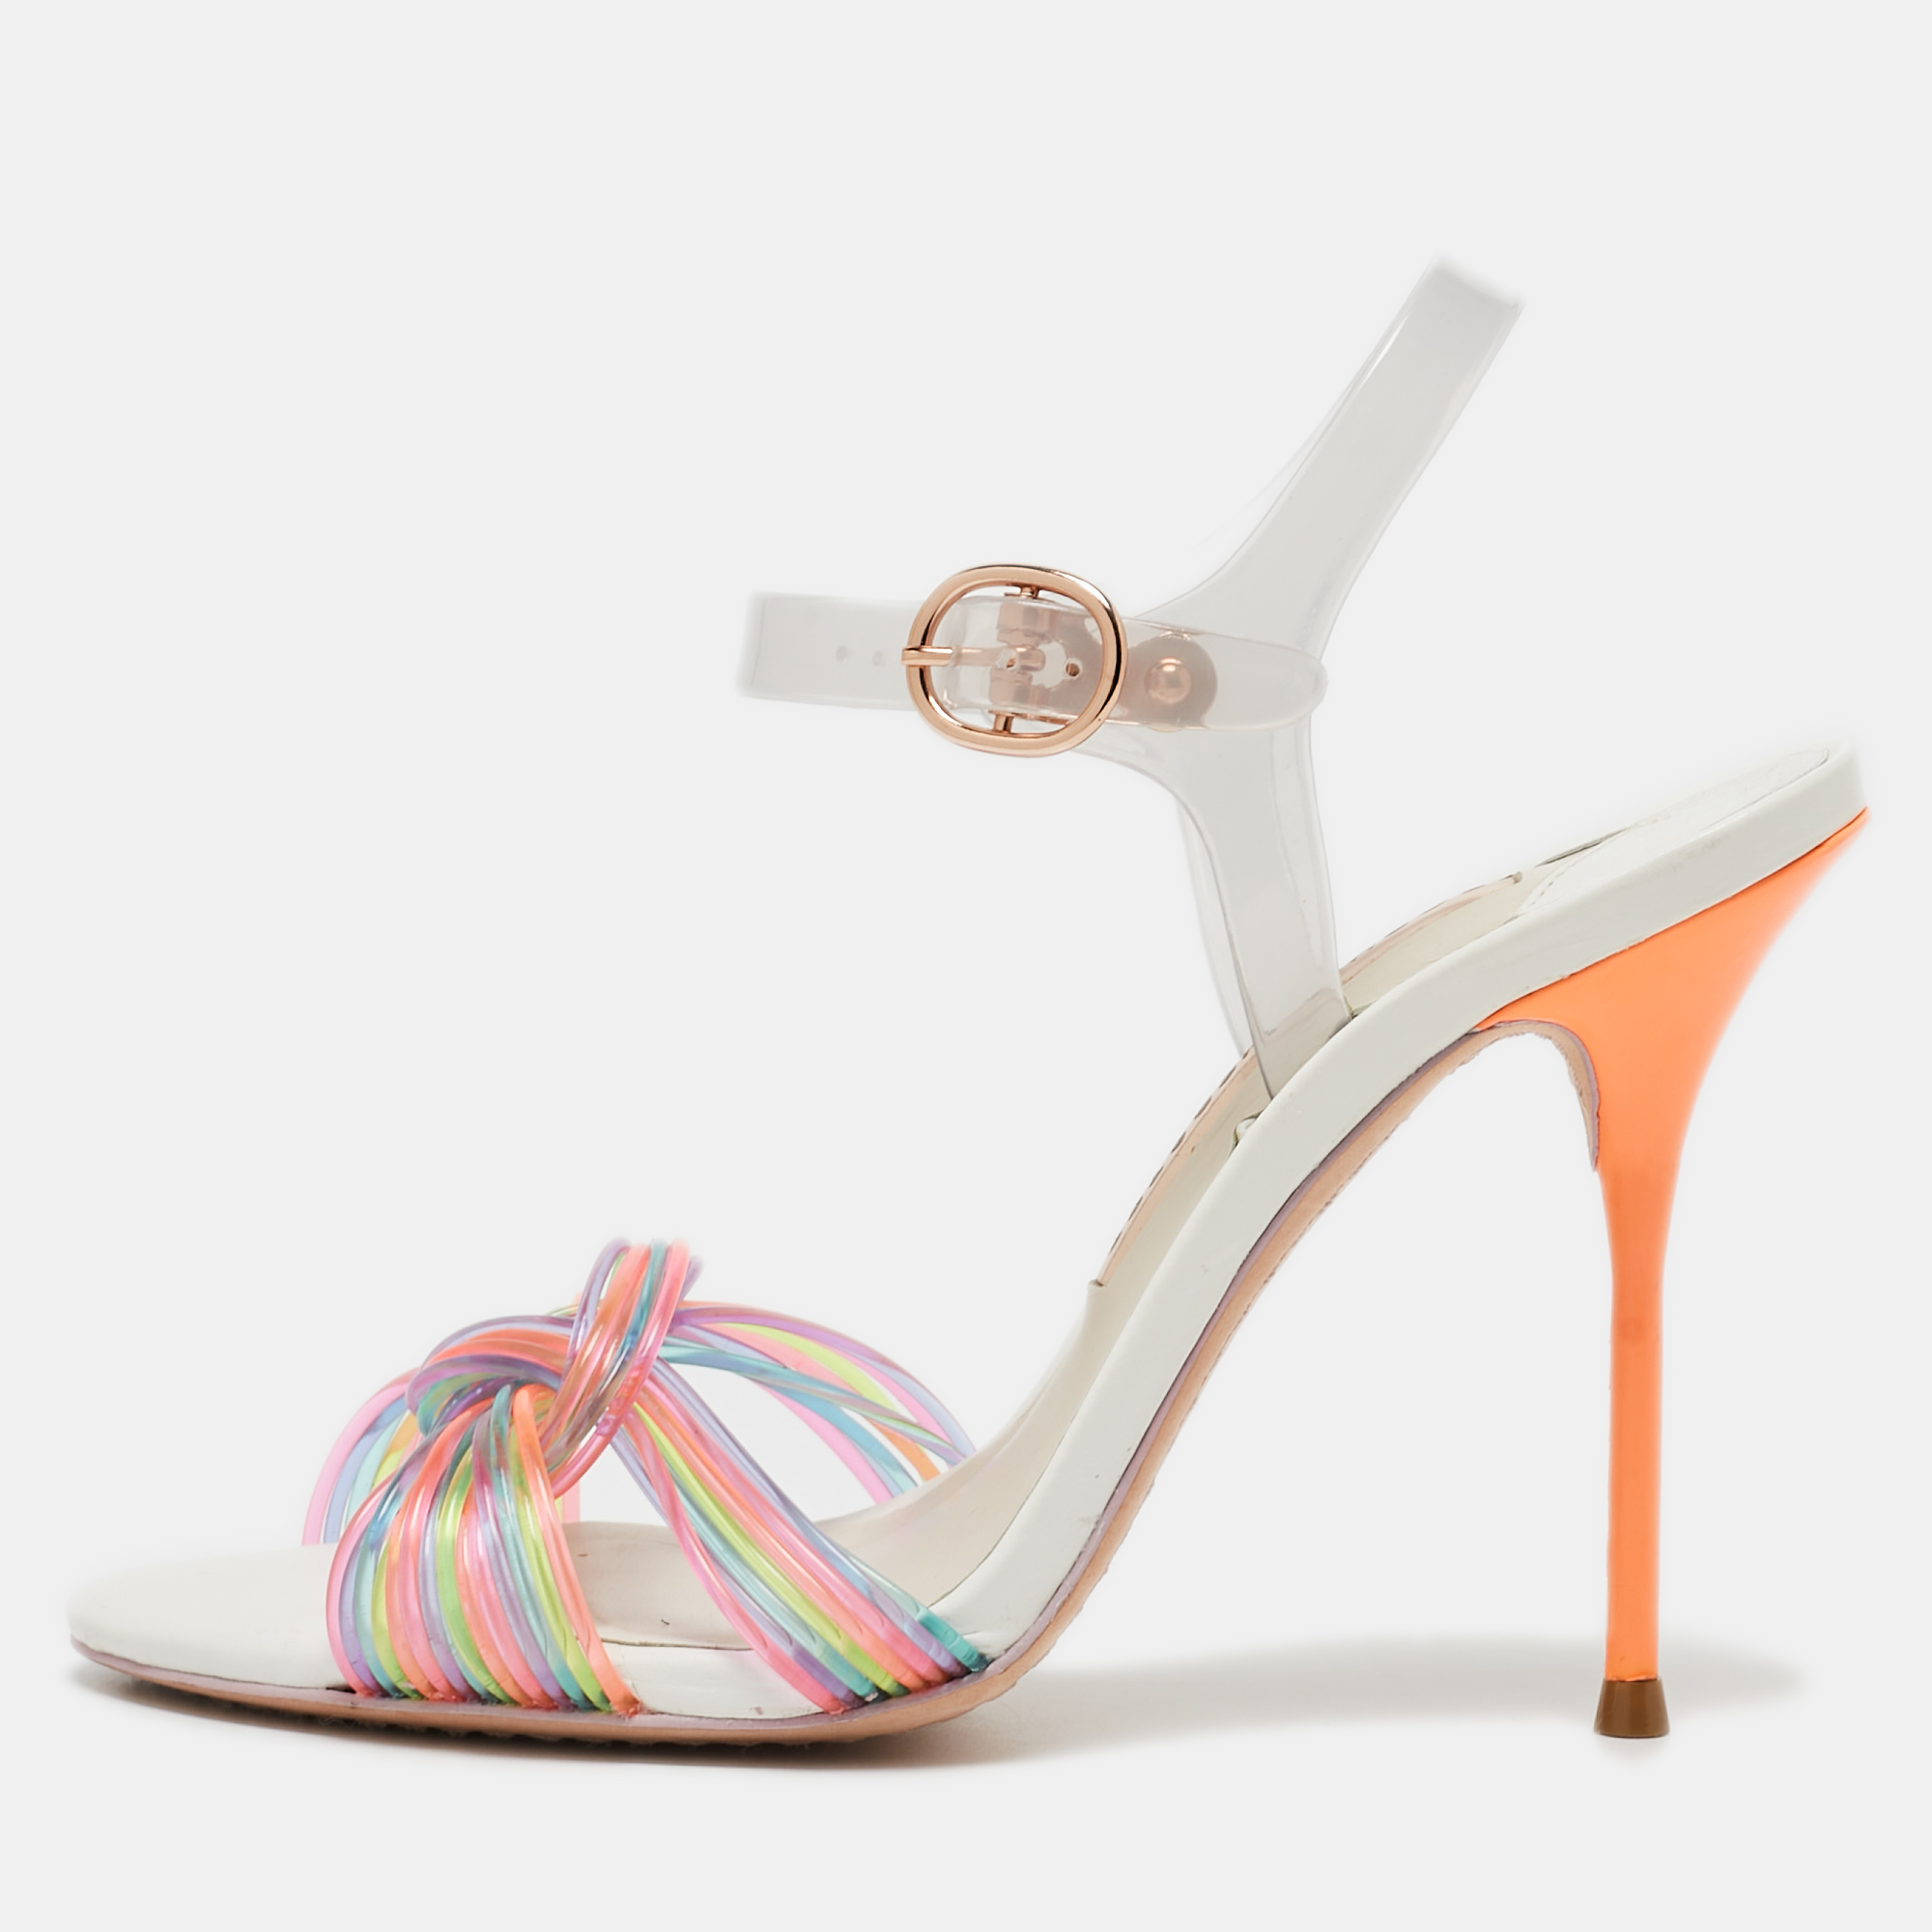 Sophia webster multicolor pvc and jelly coralie ankle strap sandals size 36.5